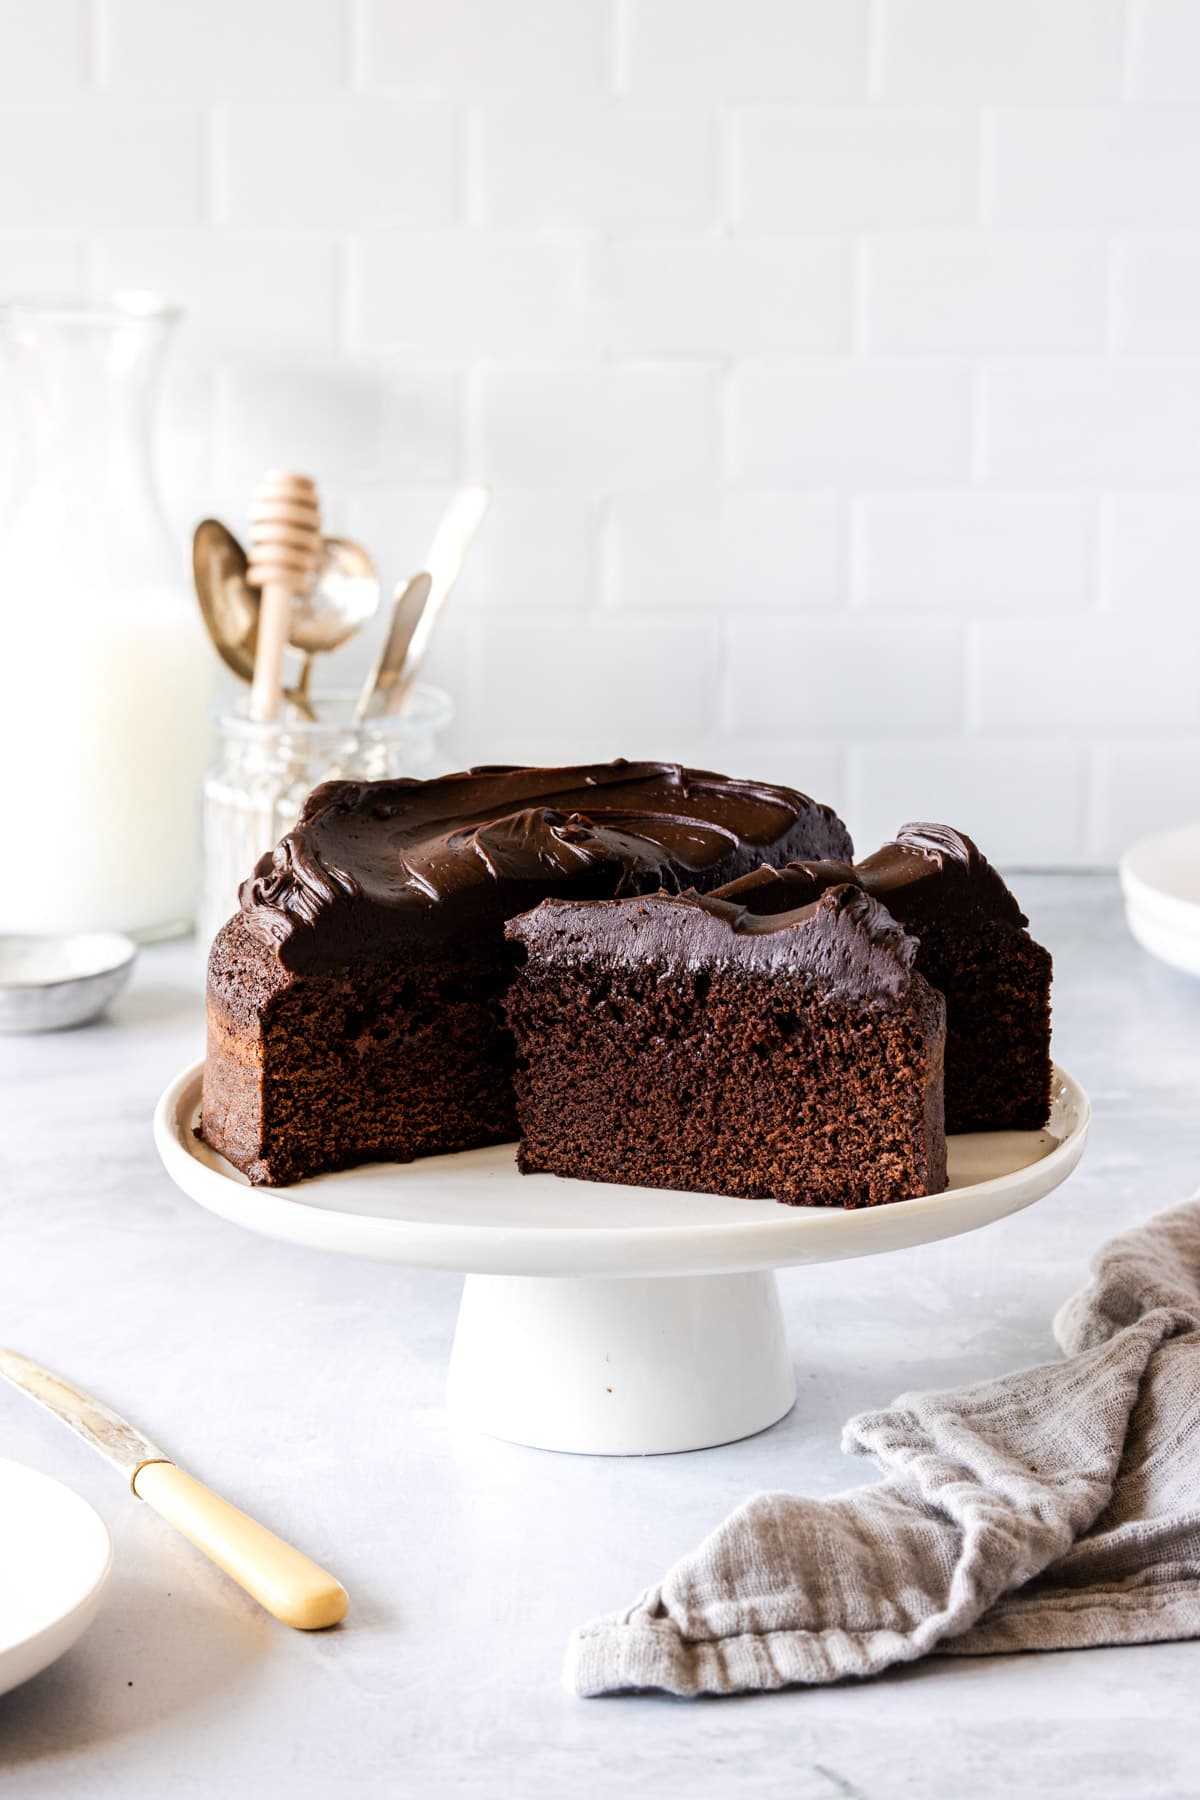 Large chocolate cake covered in chocolate frosting on a white cake stand